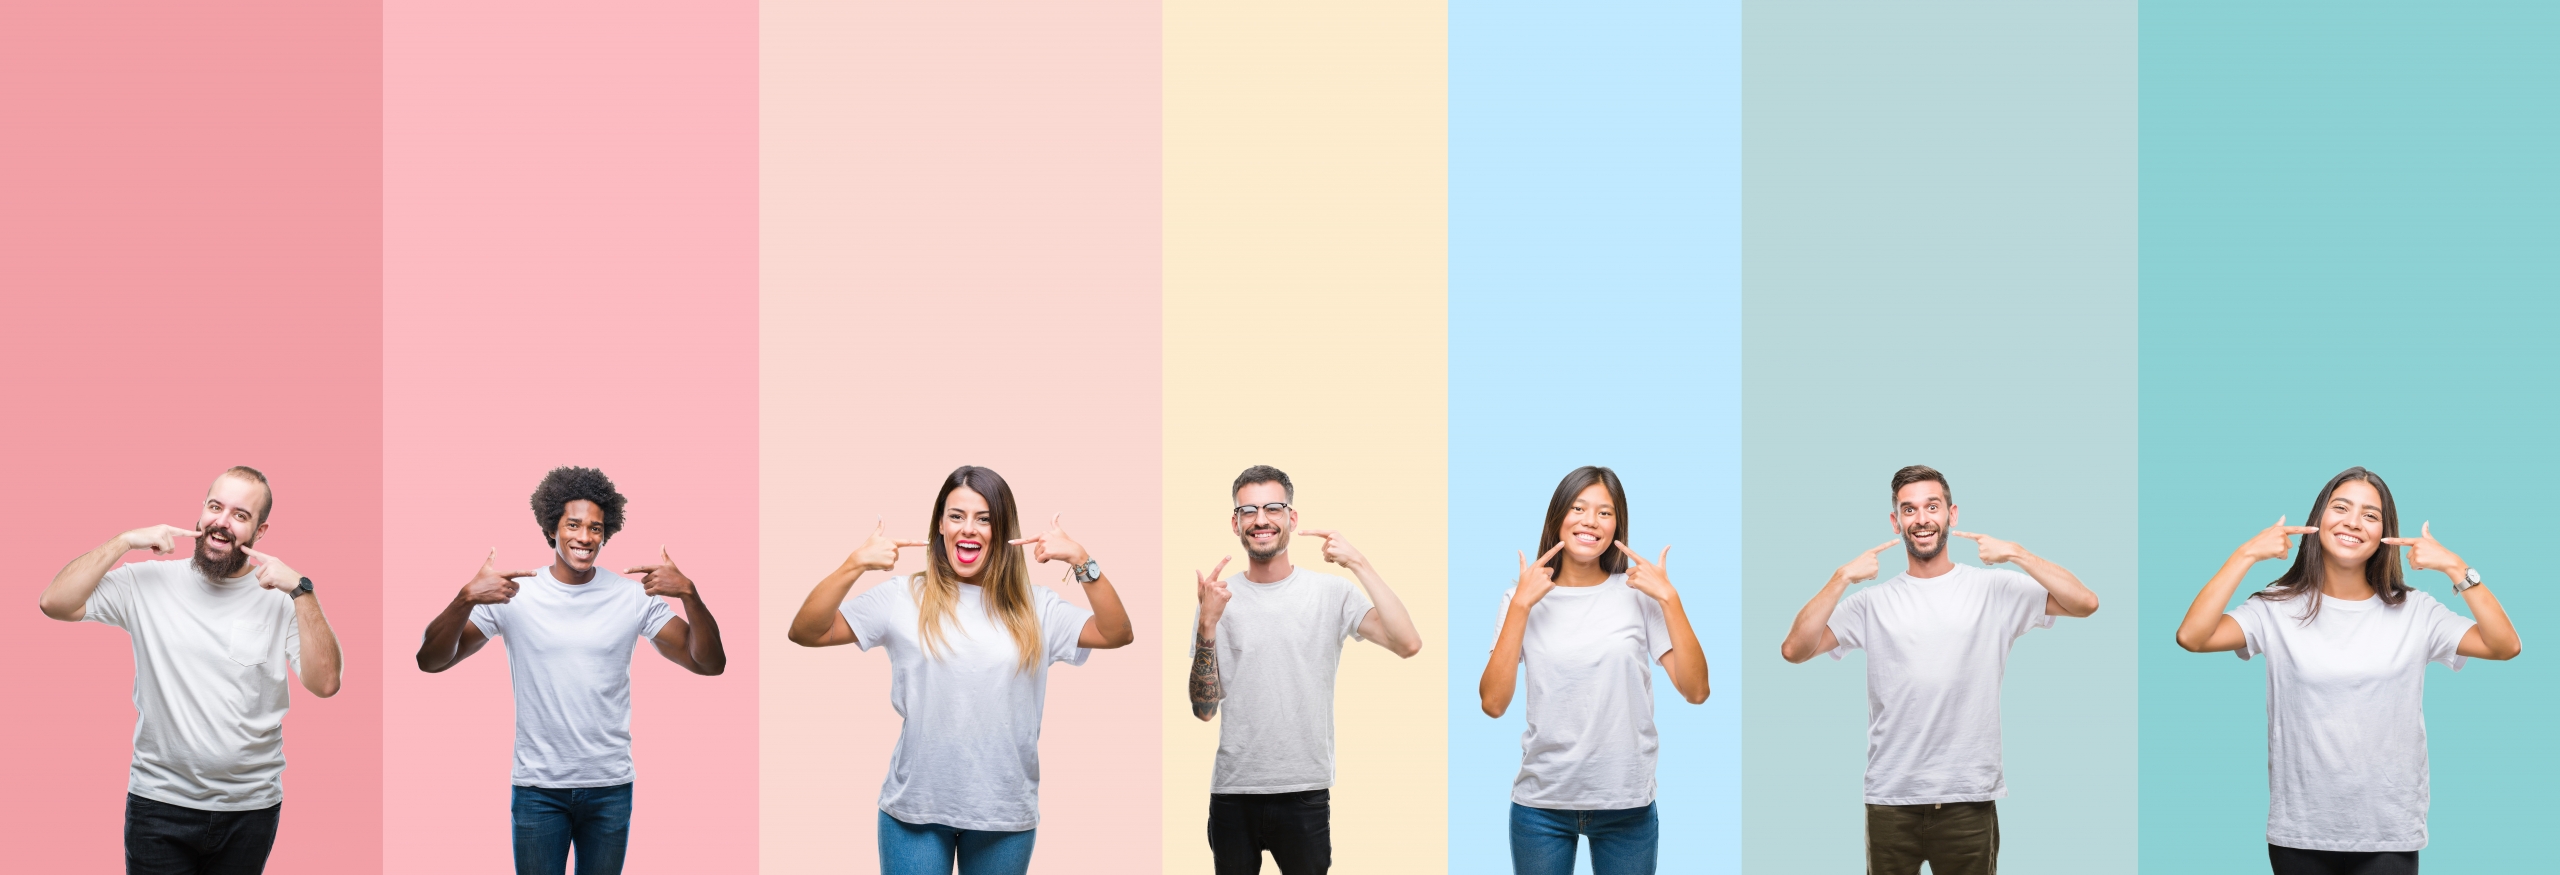 Collage of different ethnics young people wearing white t-shirt over colorful isolated background smiling confident showing and pointing with fingers teeth and mouth. Health concept.